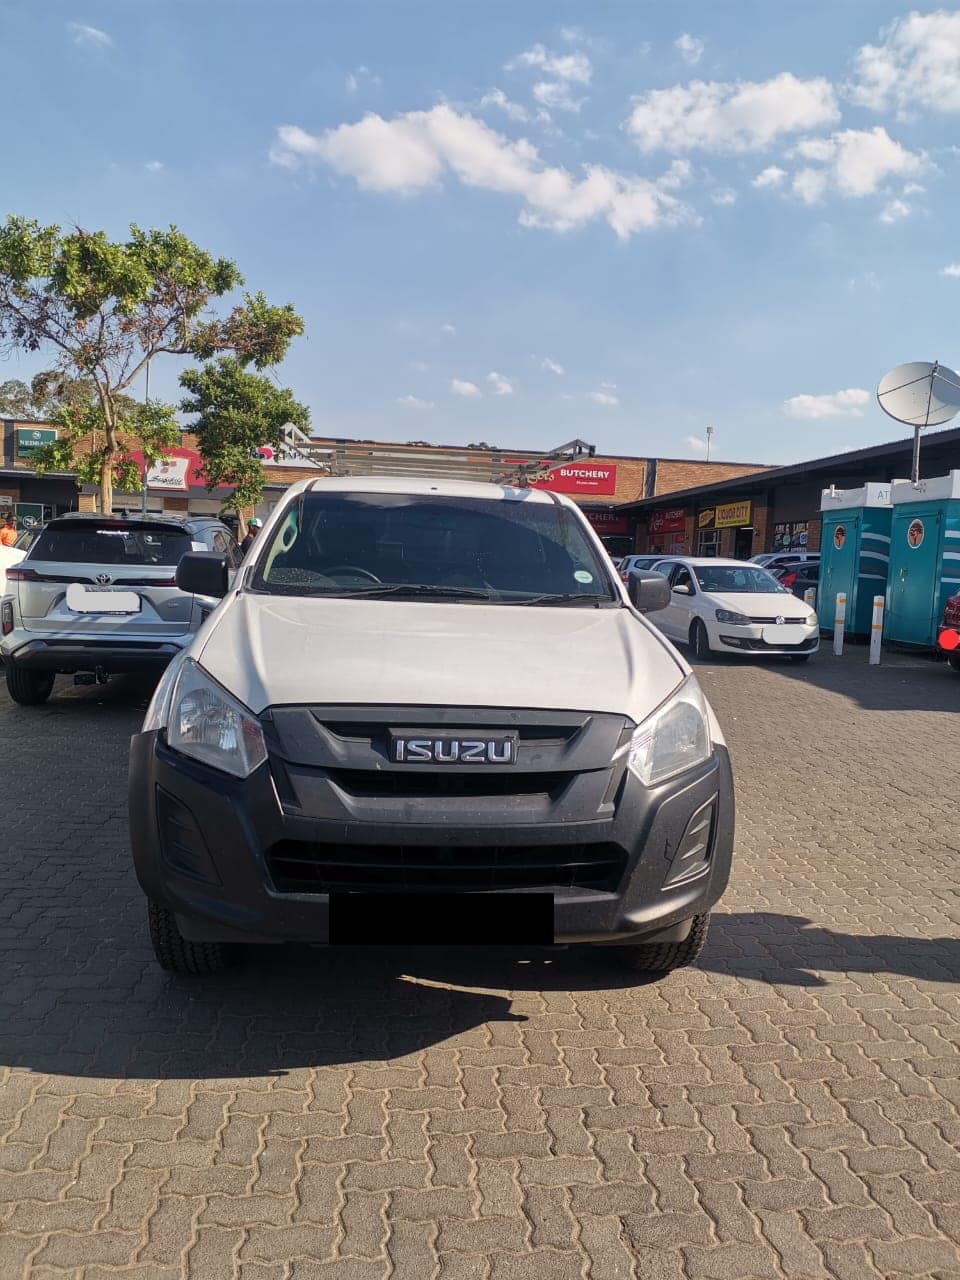 Reportedly hijacked vehicle recovered in the Daveyton area